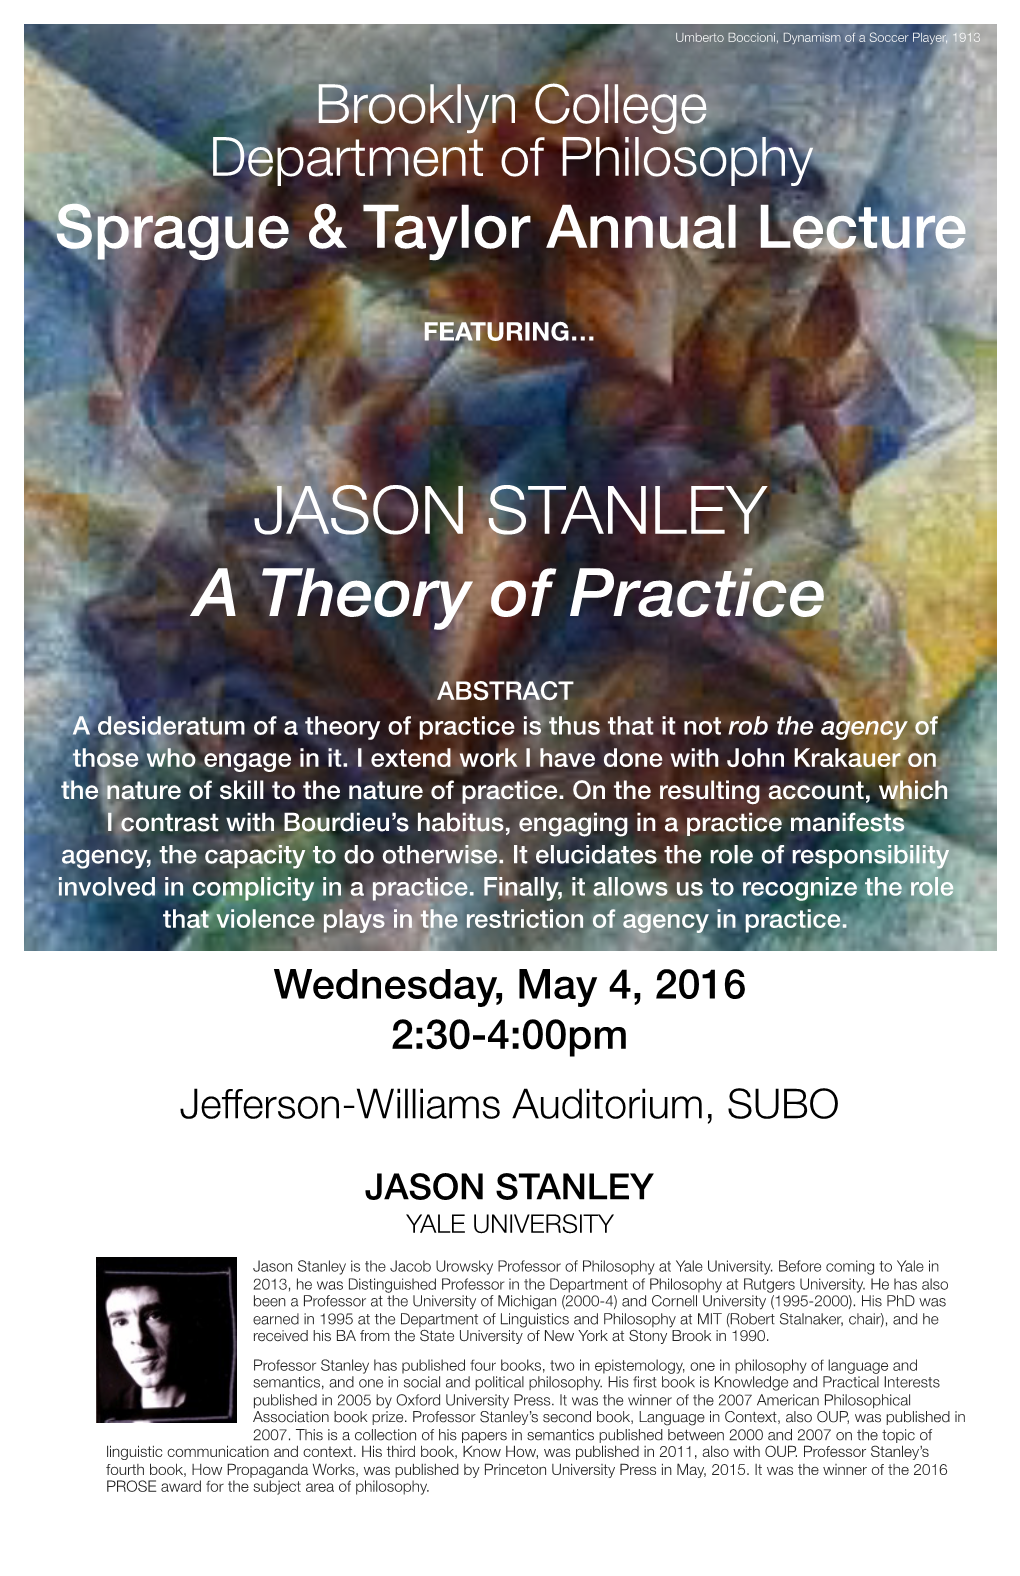 JASON STANLEY a Theory of Practice